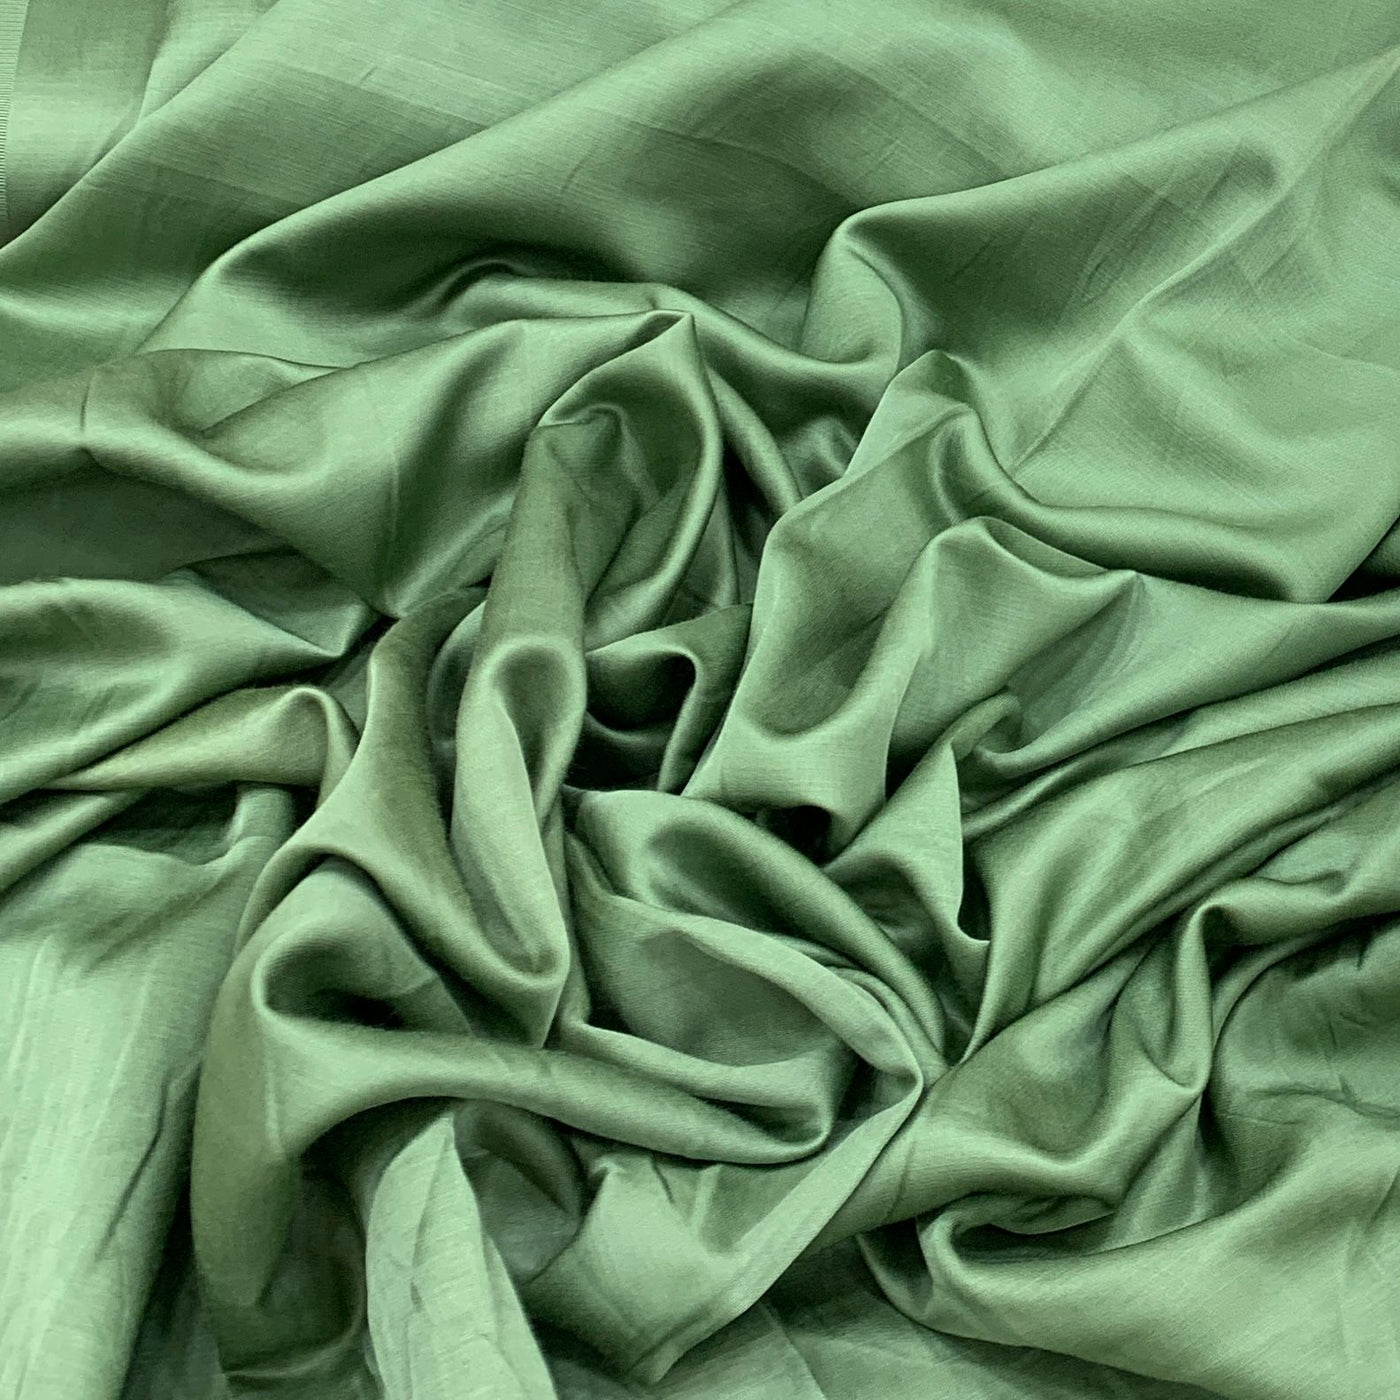 Buy Green Plain Linen Cotton Fabric for Best Price, Reviews, Free Shipping